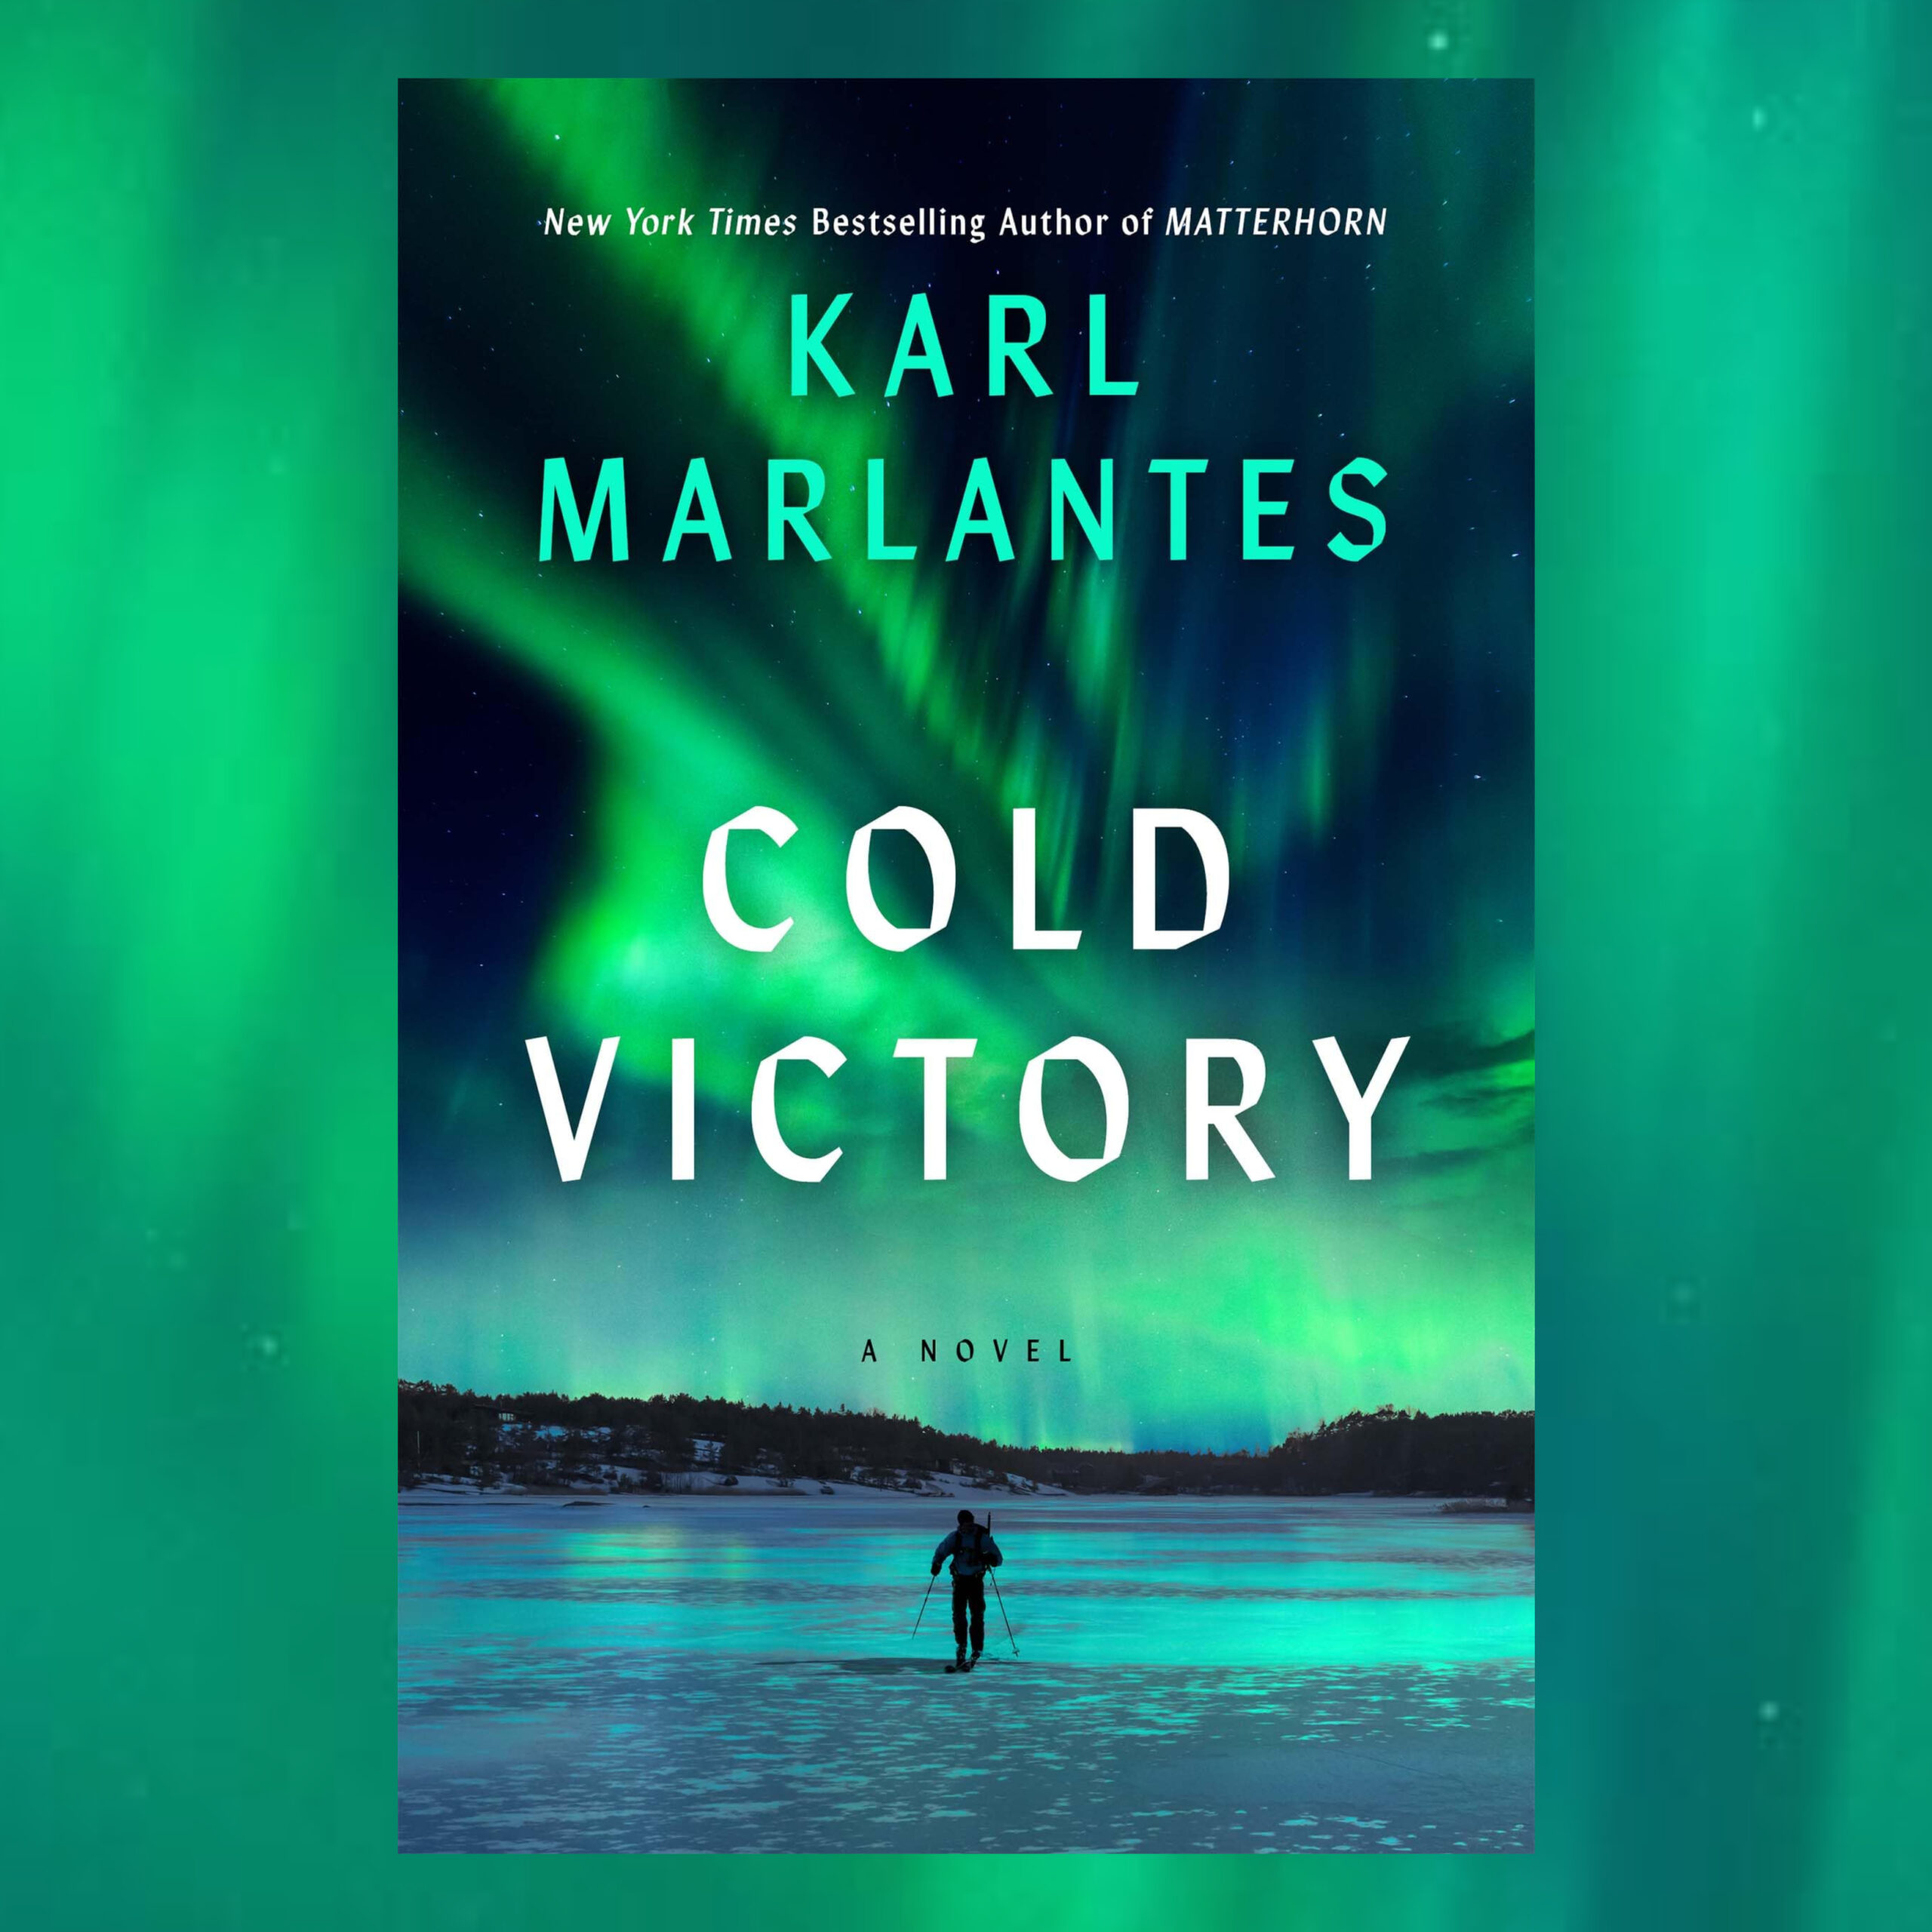 The Book Show | Karl Marlantes - Cold Victory